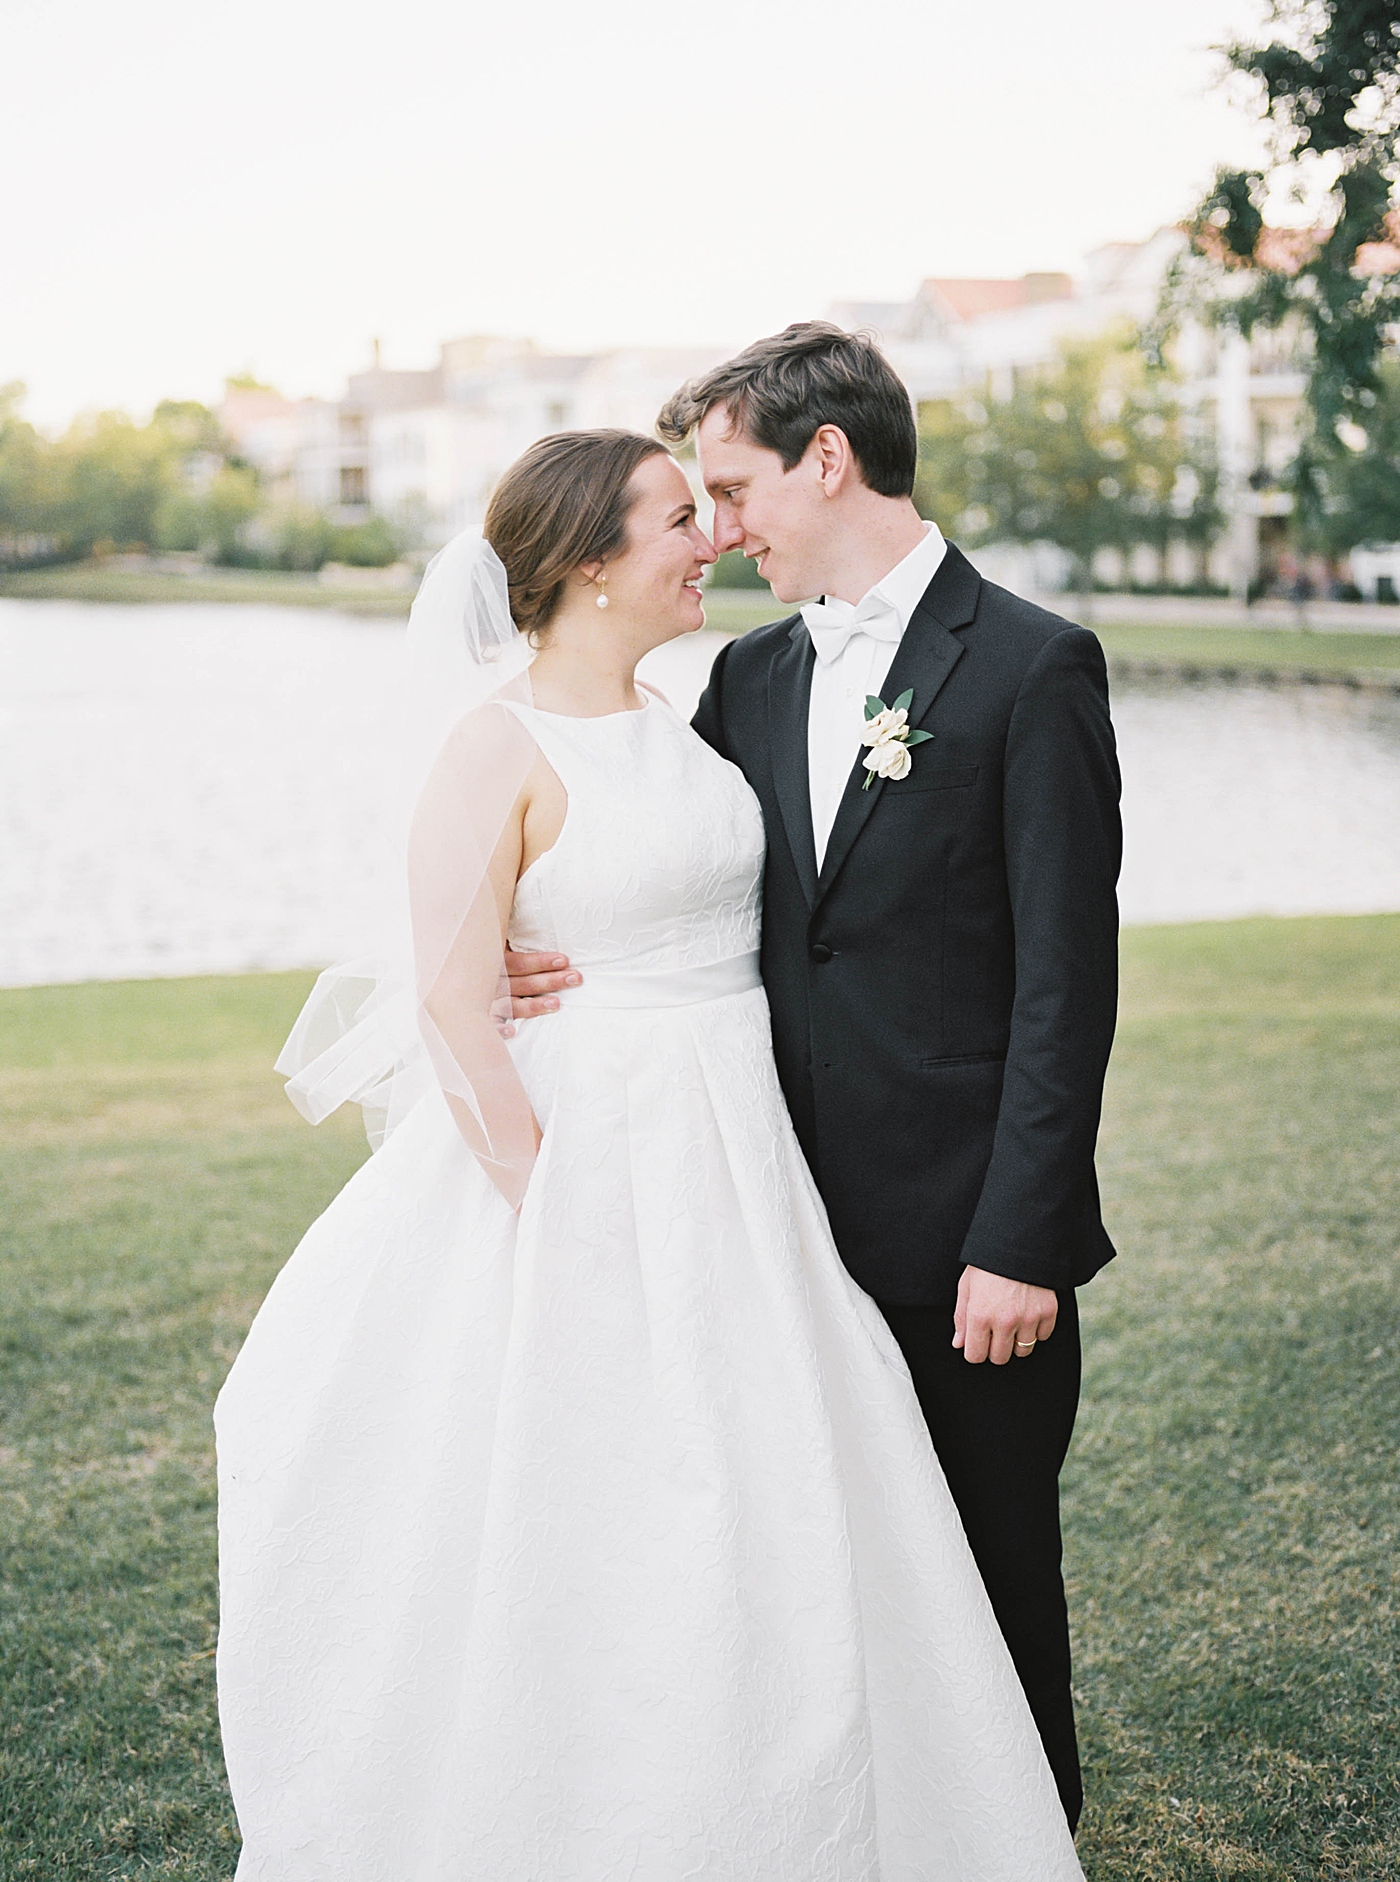 Bride and groom with foreheads together | Carters Event Co